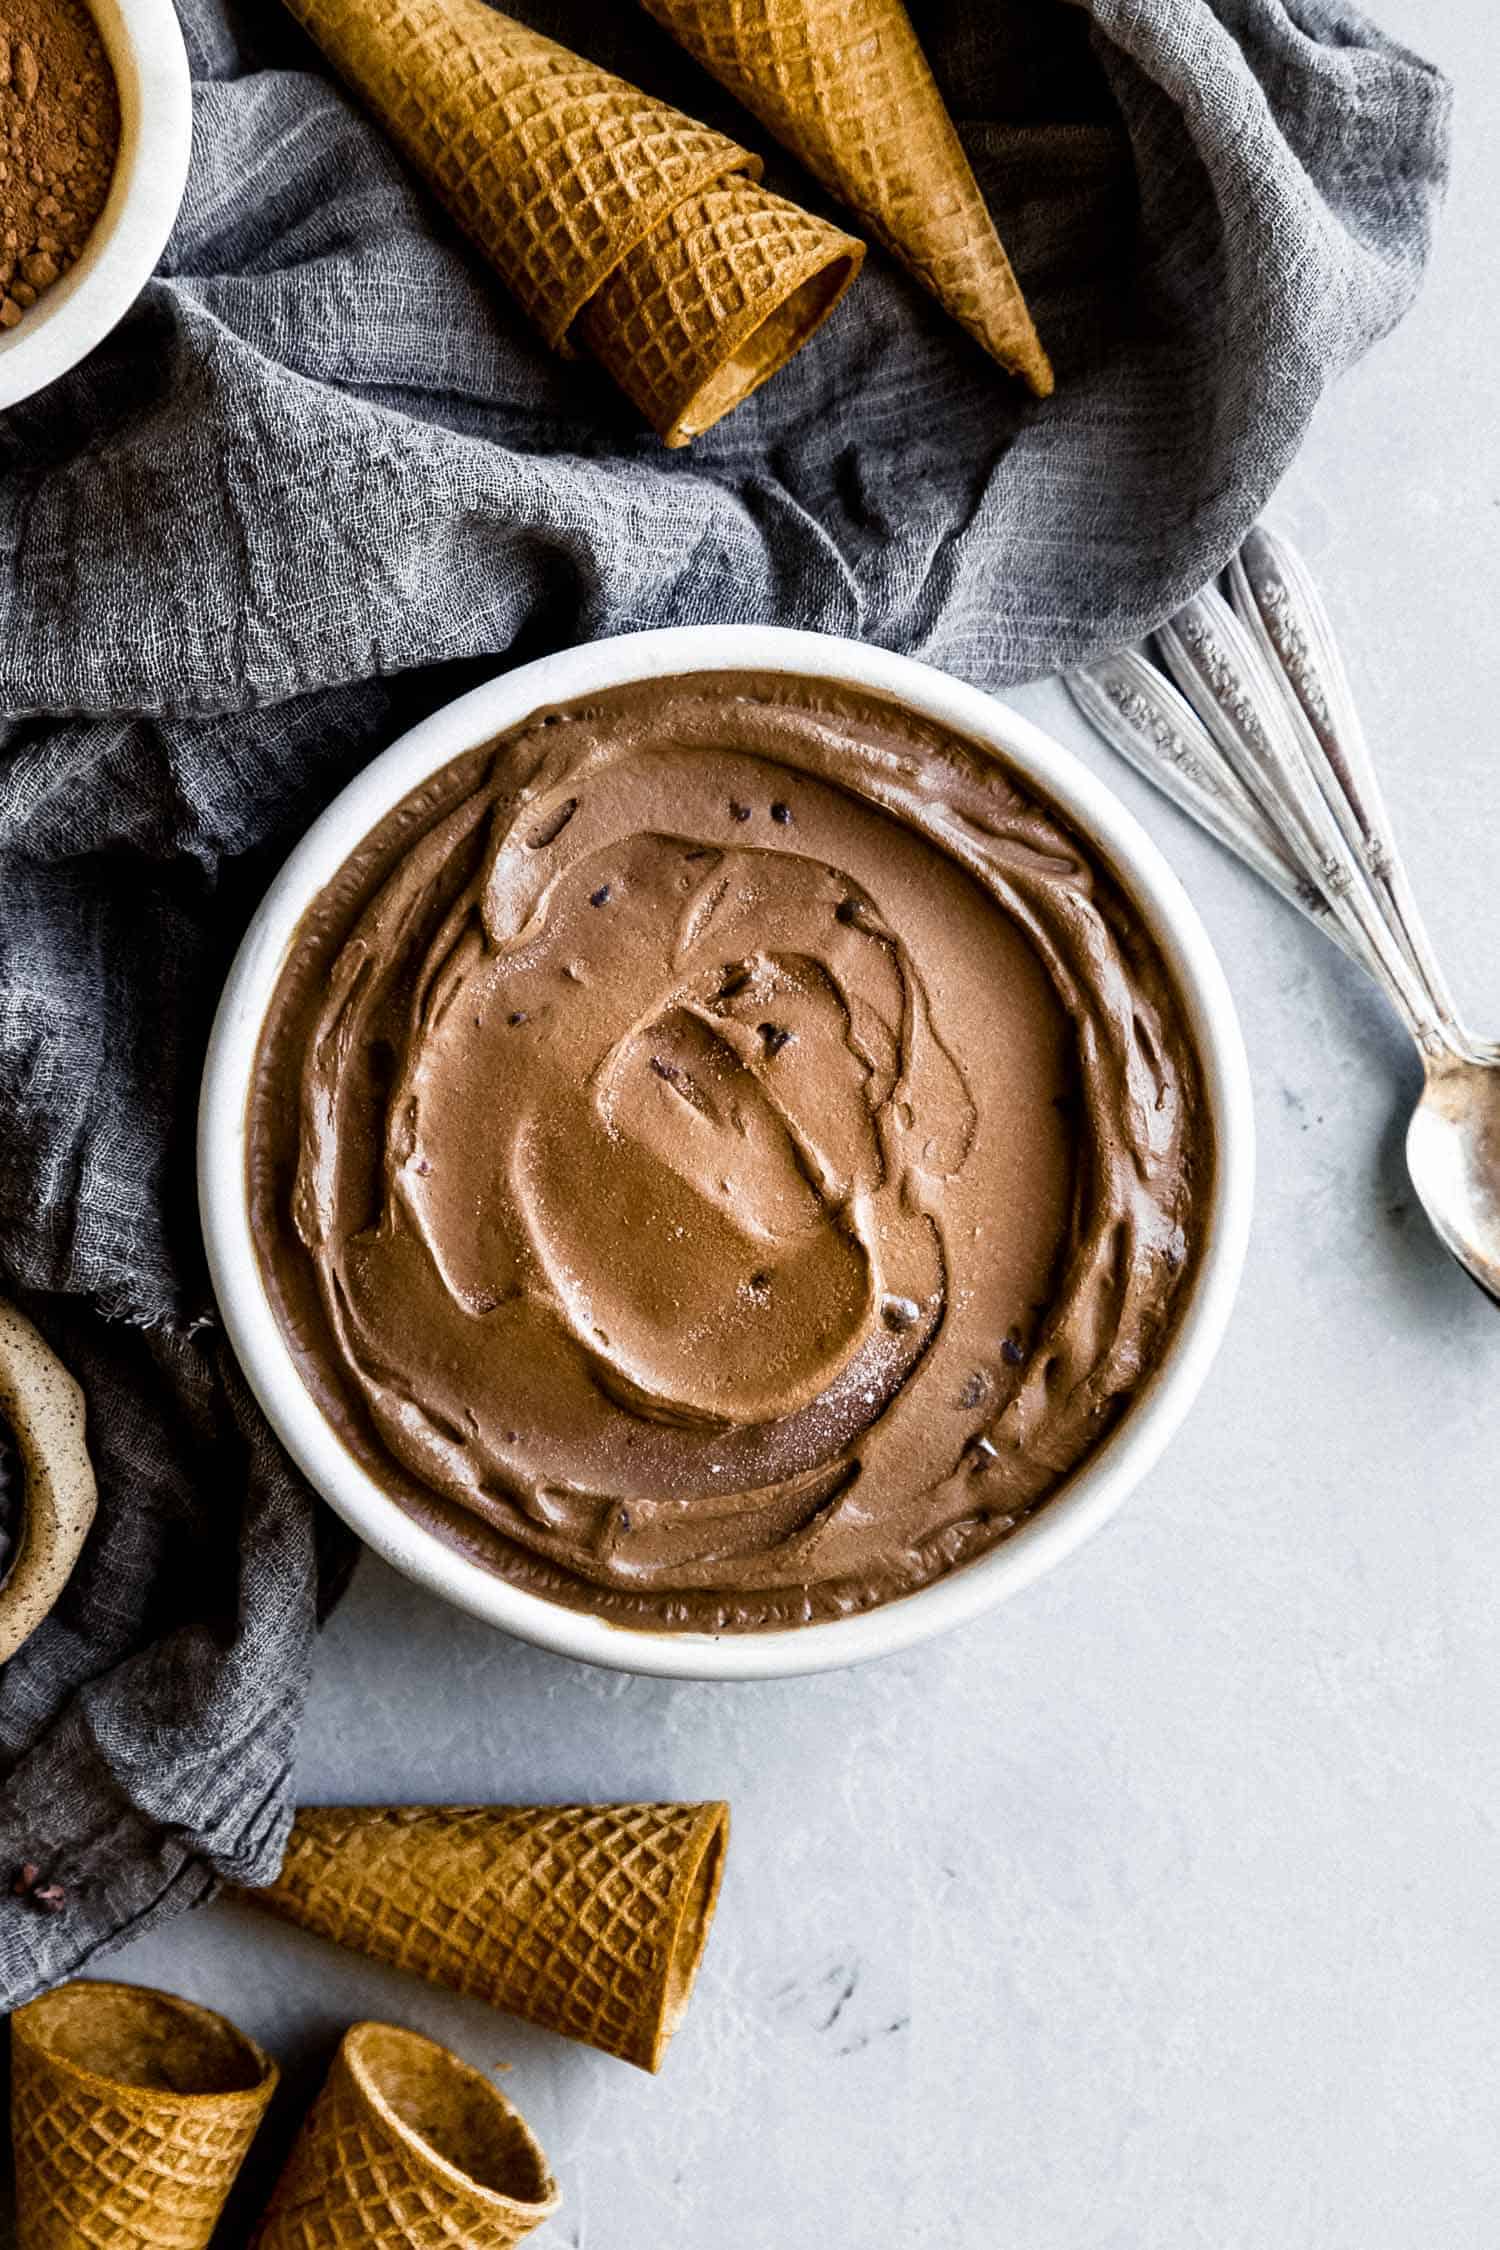 creamy chocolate ice cream in a circular pan with cones on the side